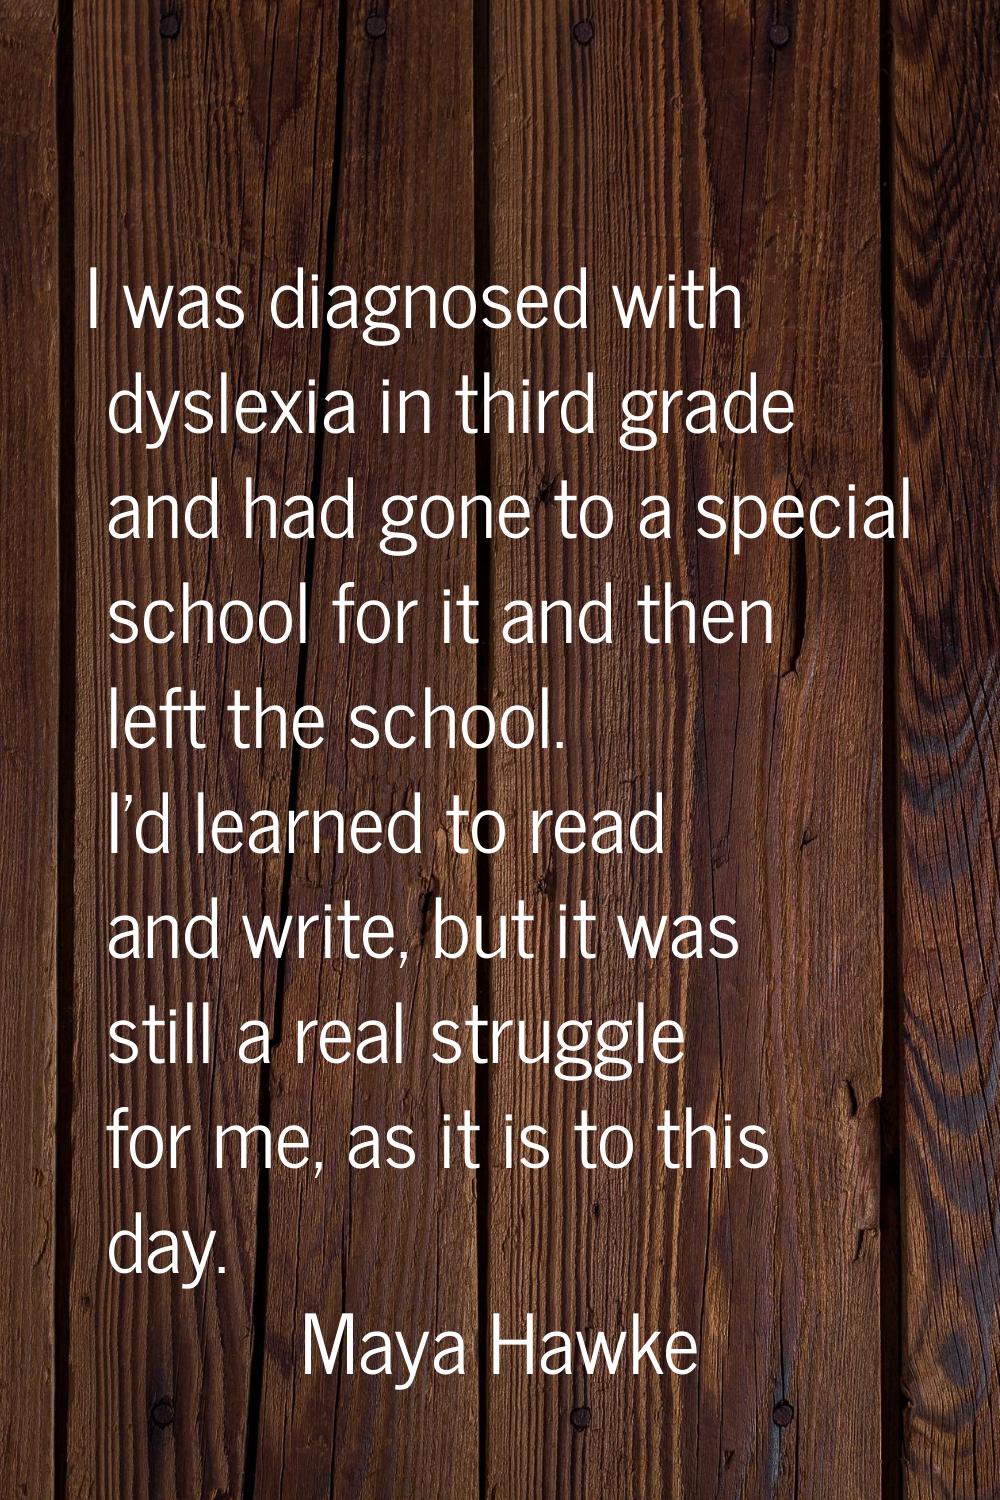 I was diagnosed with dyslexia in third grade and had gone to a special school for it and then left 